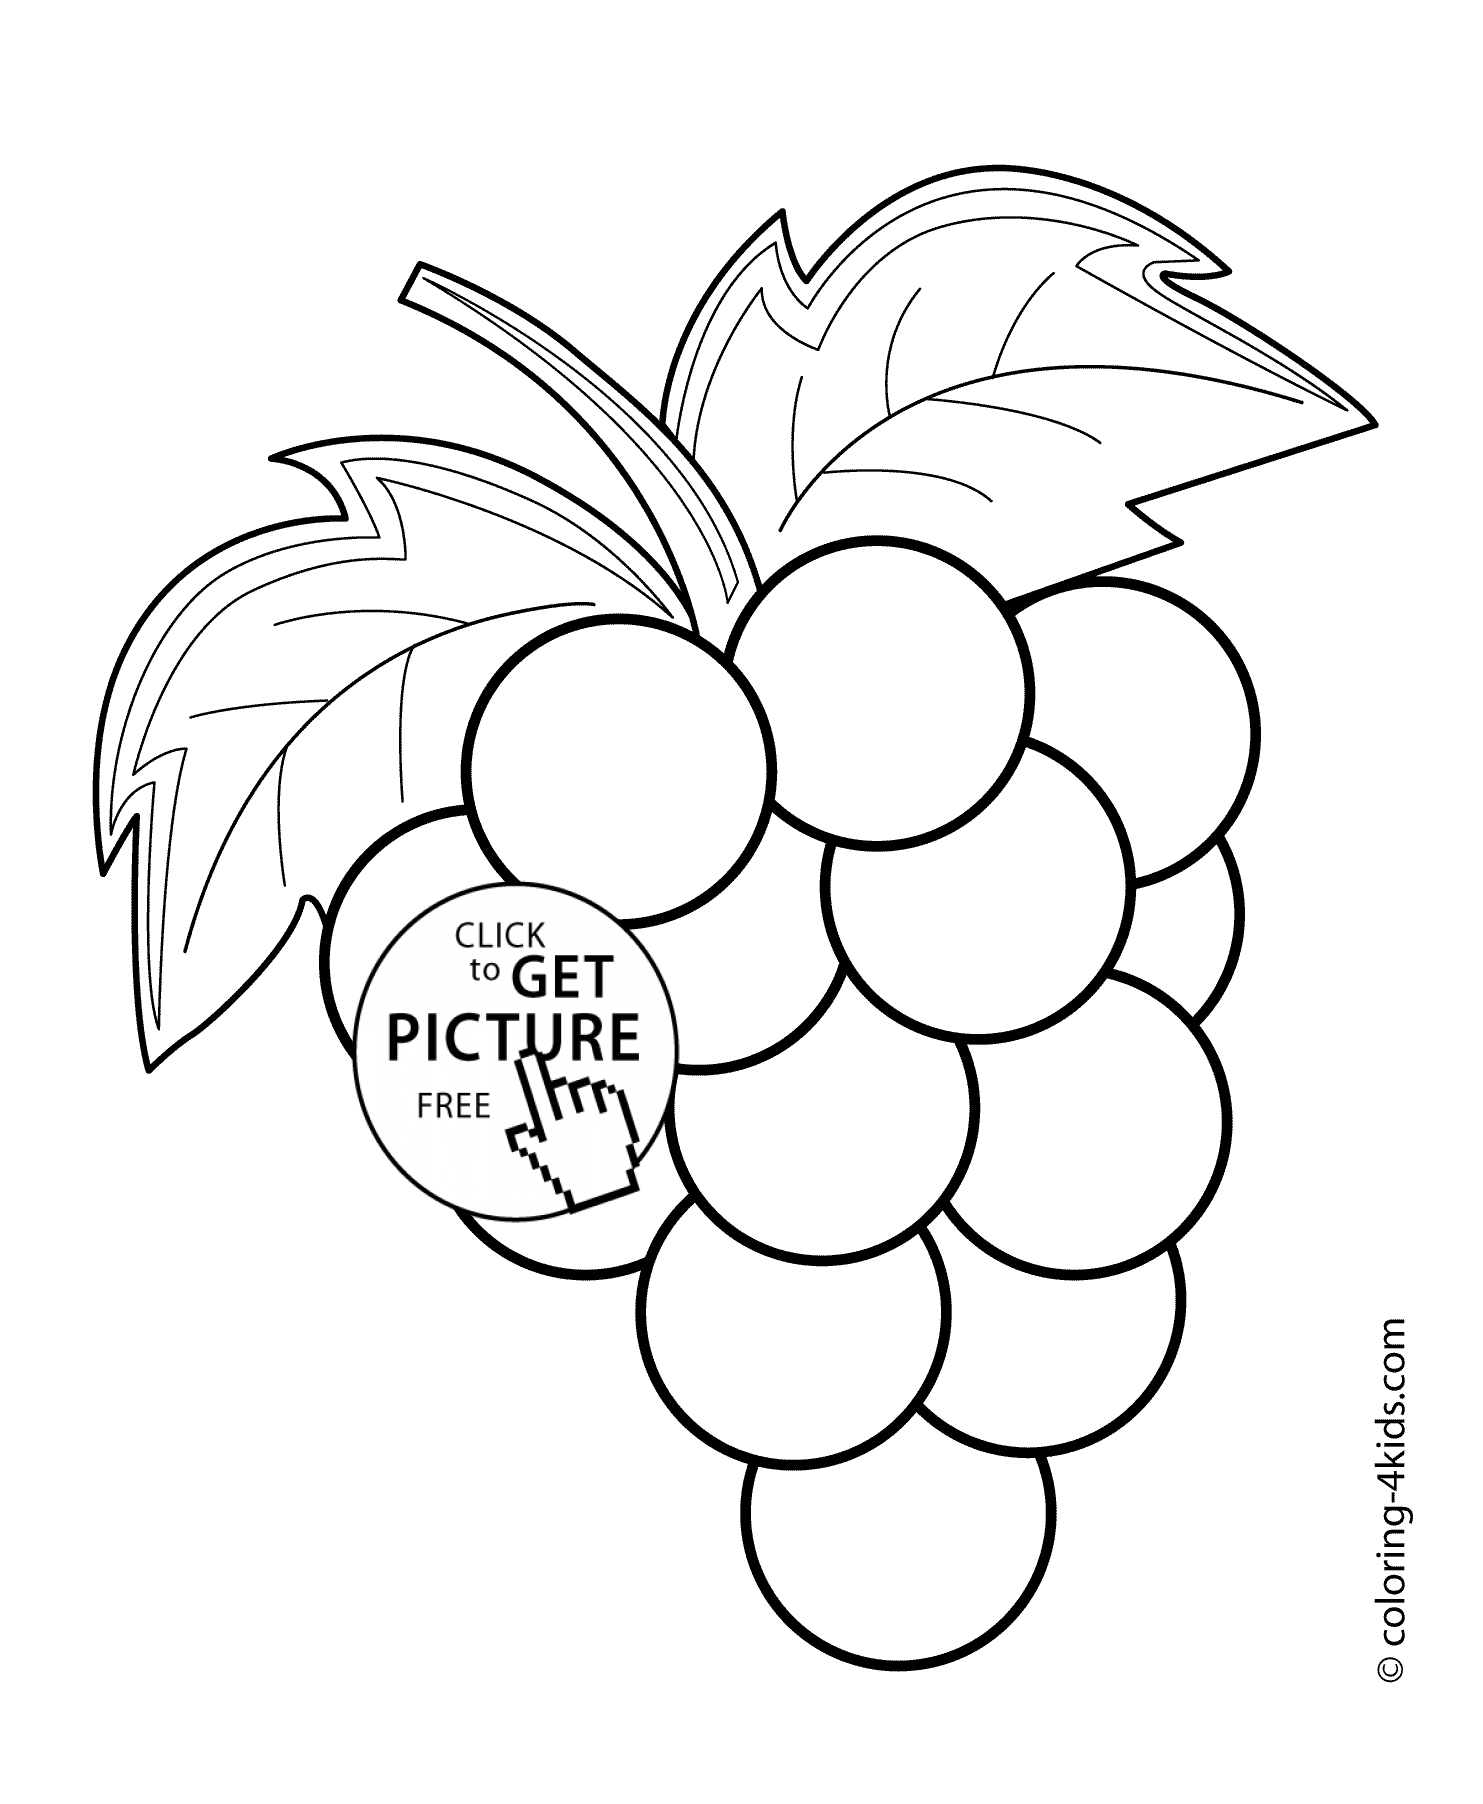 Grapes Coloring Page - Coloring Home